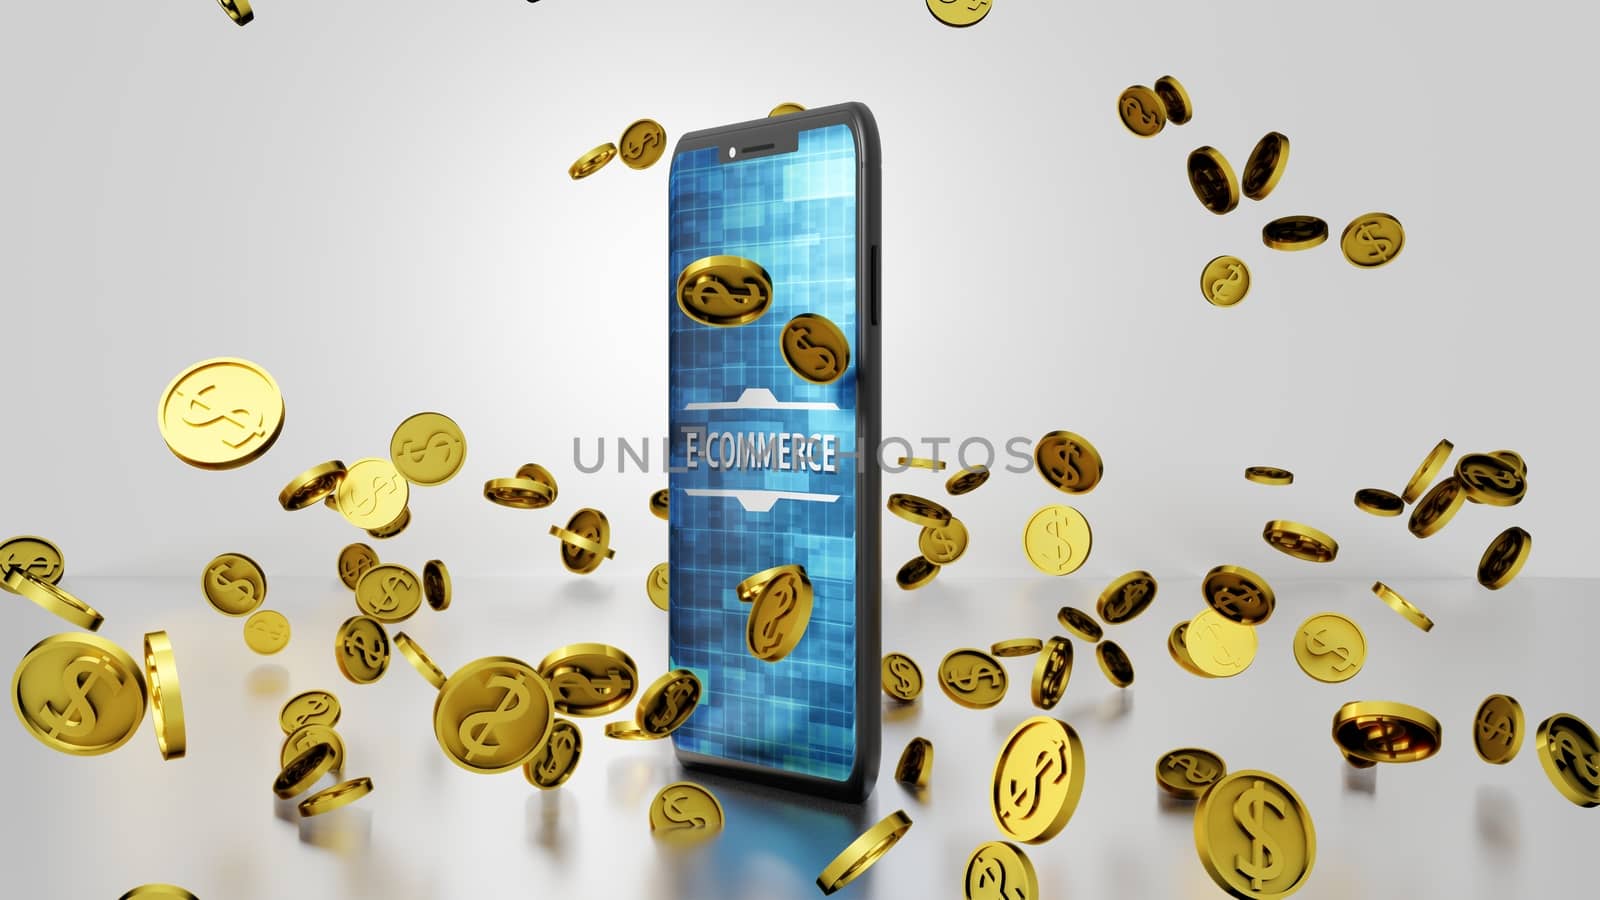 8K E-commerce 3D render Smartphone and Golden Dollar Coins Falling and Bouncing on the Floor with Abstract Digital Display on the Screen Ver.2 by ariya23156